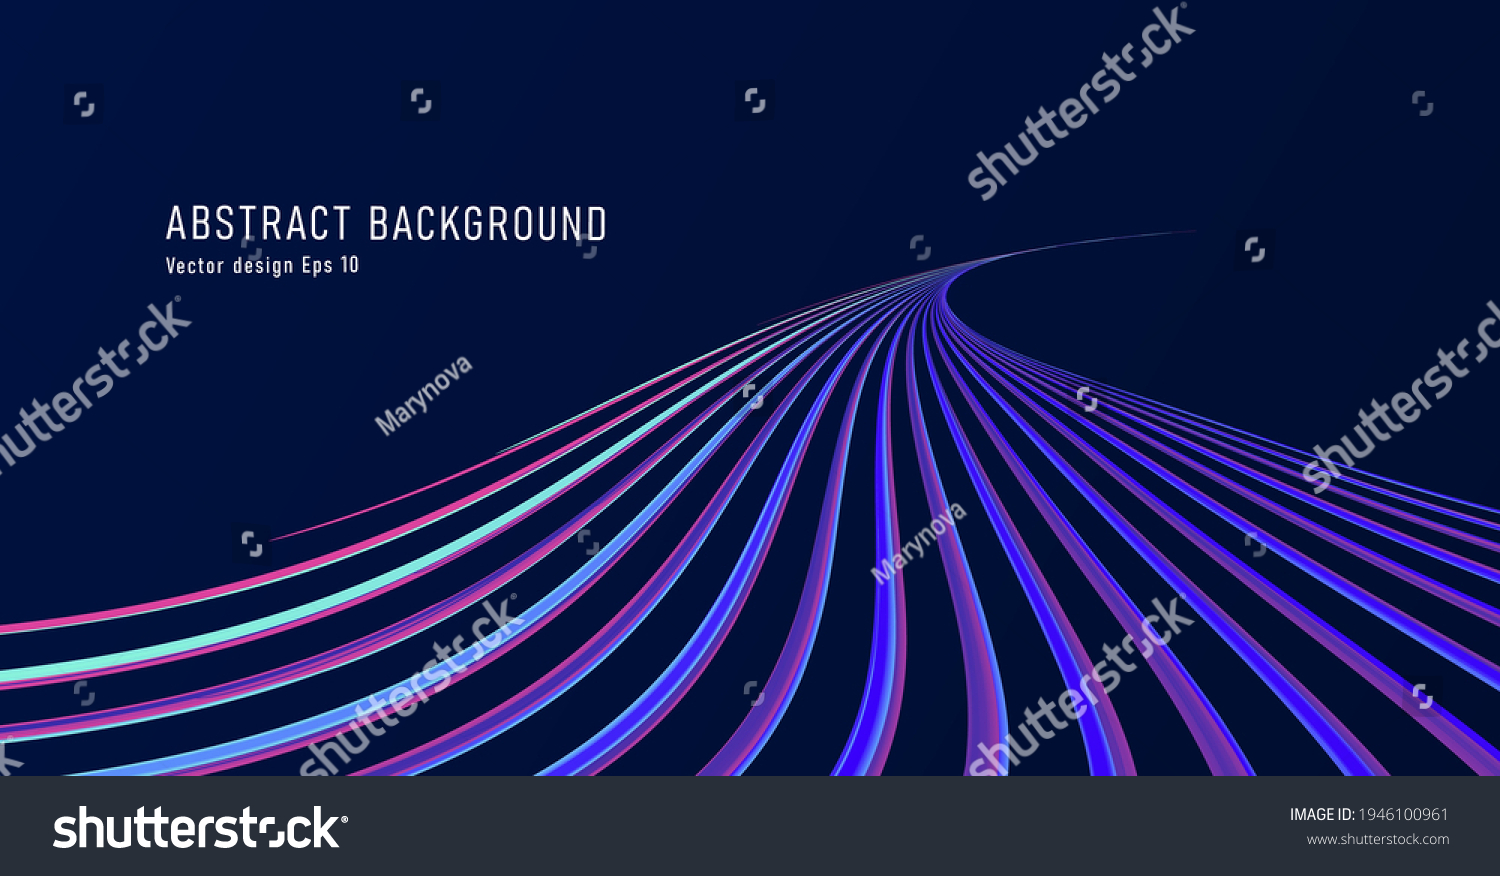 SVG of Abstract blue track or path formed by cool lines, highway graphic illustration in perspective svg